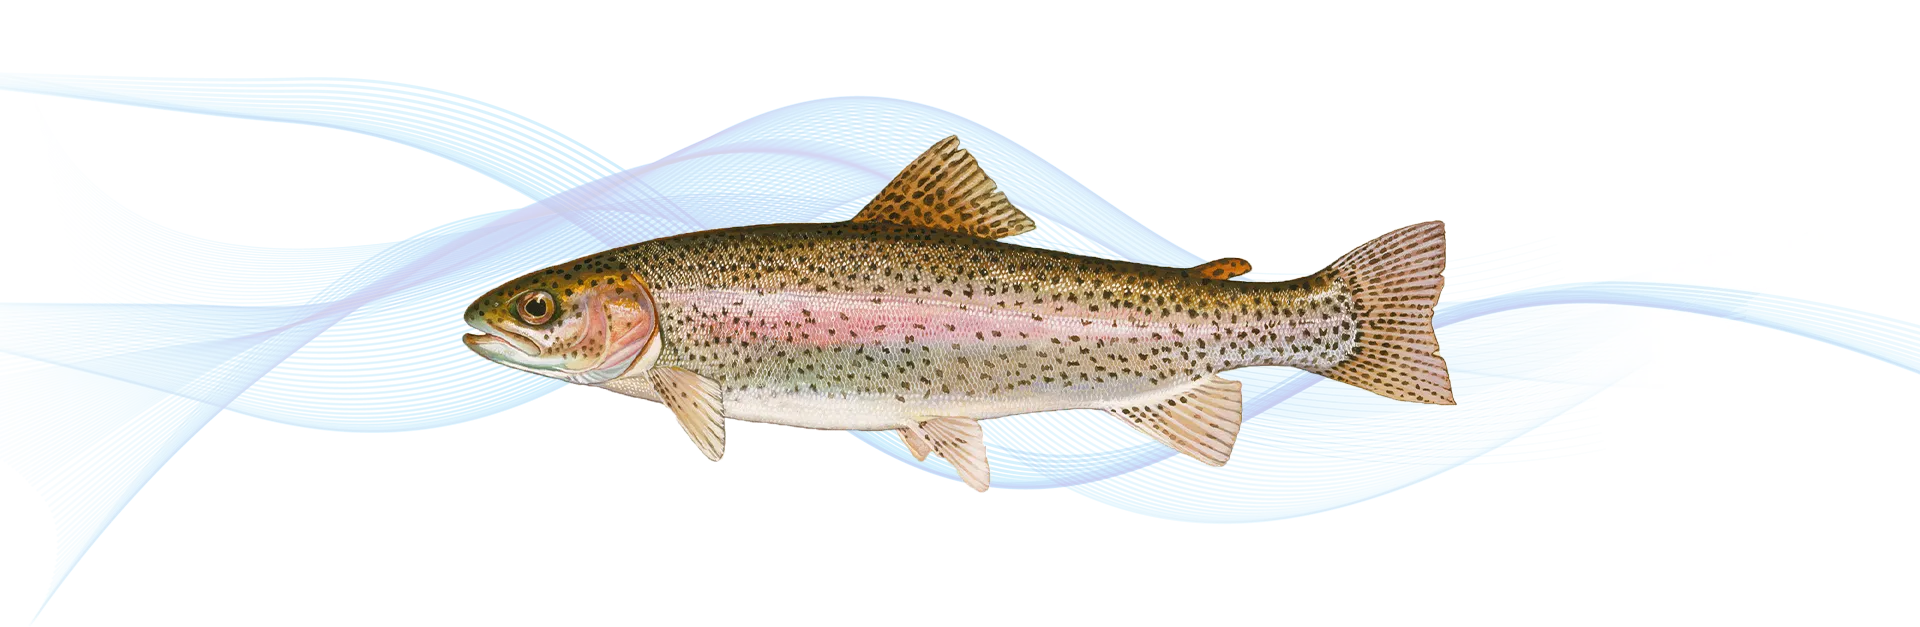 Salmon trout fish and salmon trout differences